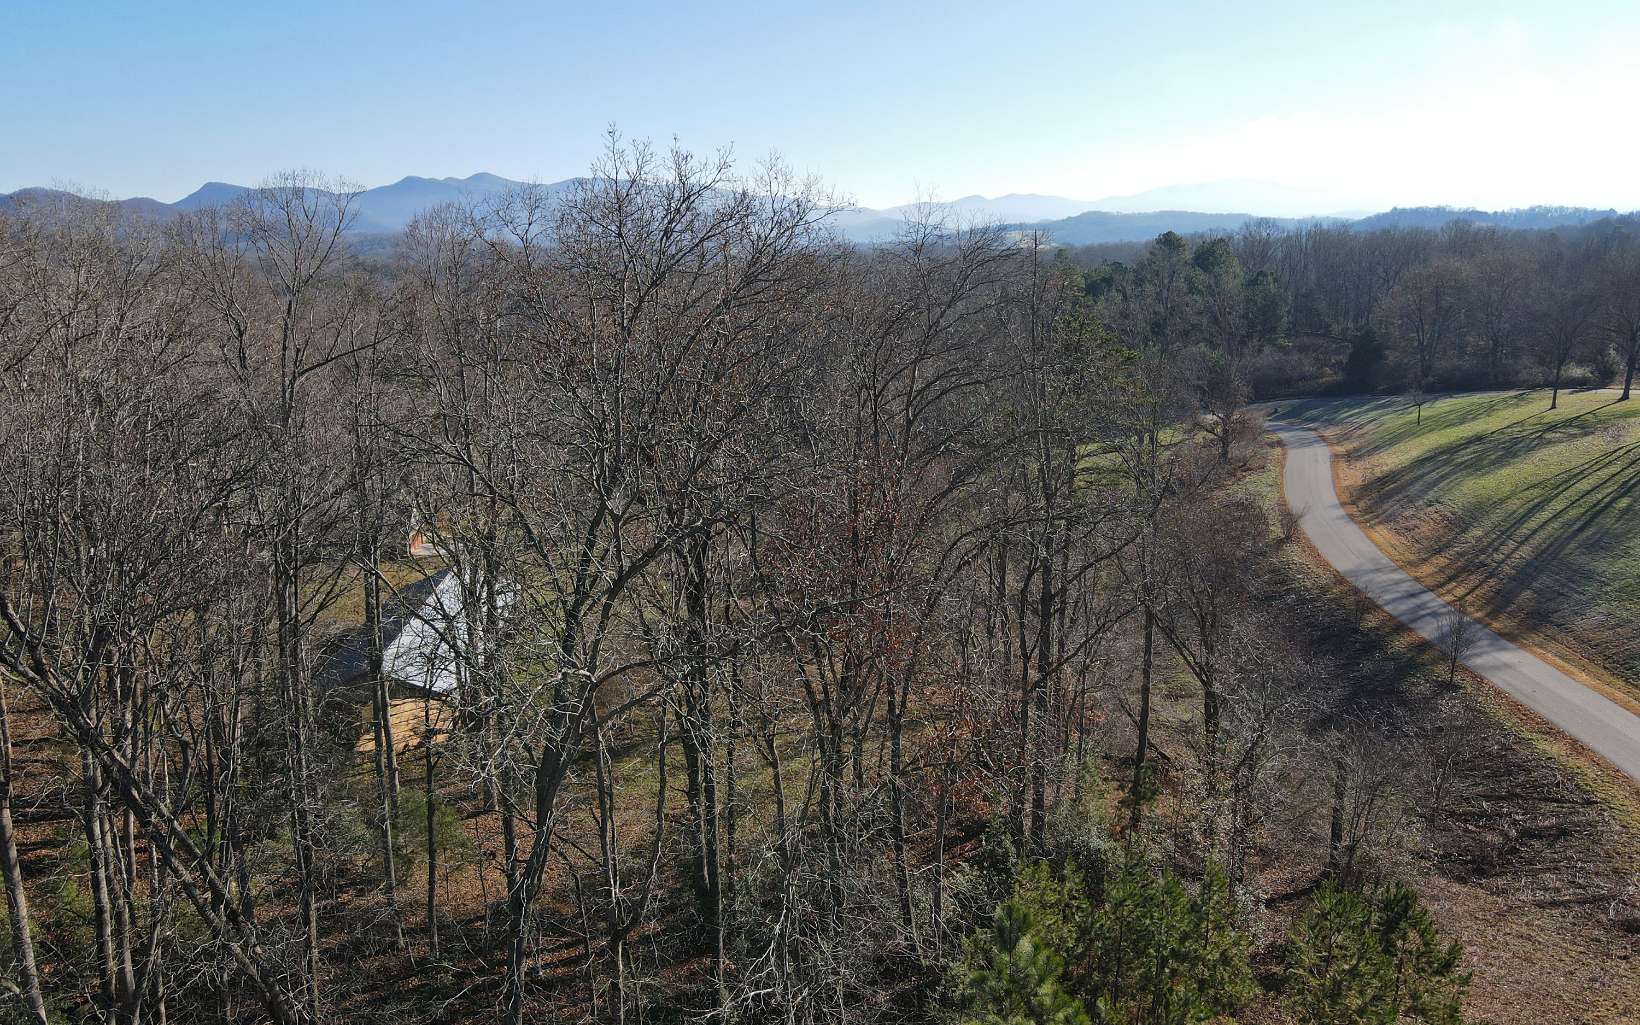 Enjoy the beautiful views & country setting! This lot is located in the lovely Crestwood Heights...all paved roads, underground power & high speed internet. Build your dream home on this great buildable lot!